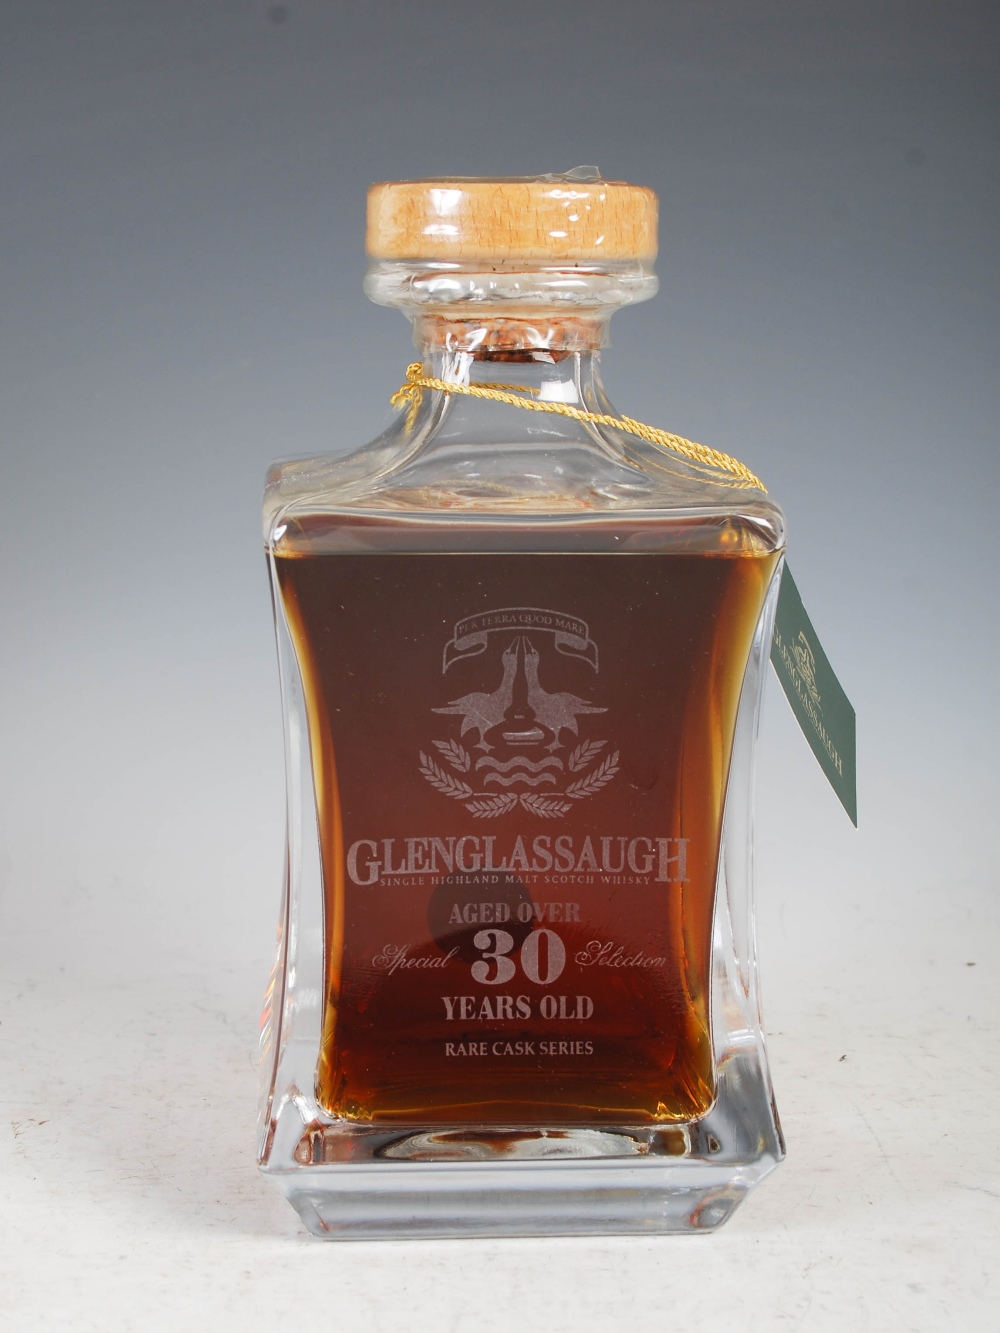 A boxed limited edition bottle of Glenglassaugh Rare Cask Series Highland Single Malt Scotch Whisky, - Image 2 of 6